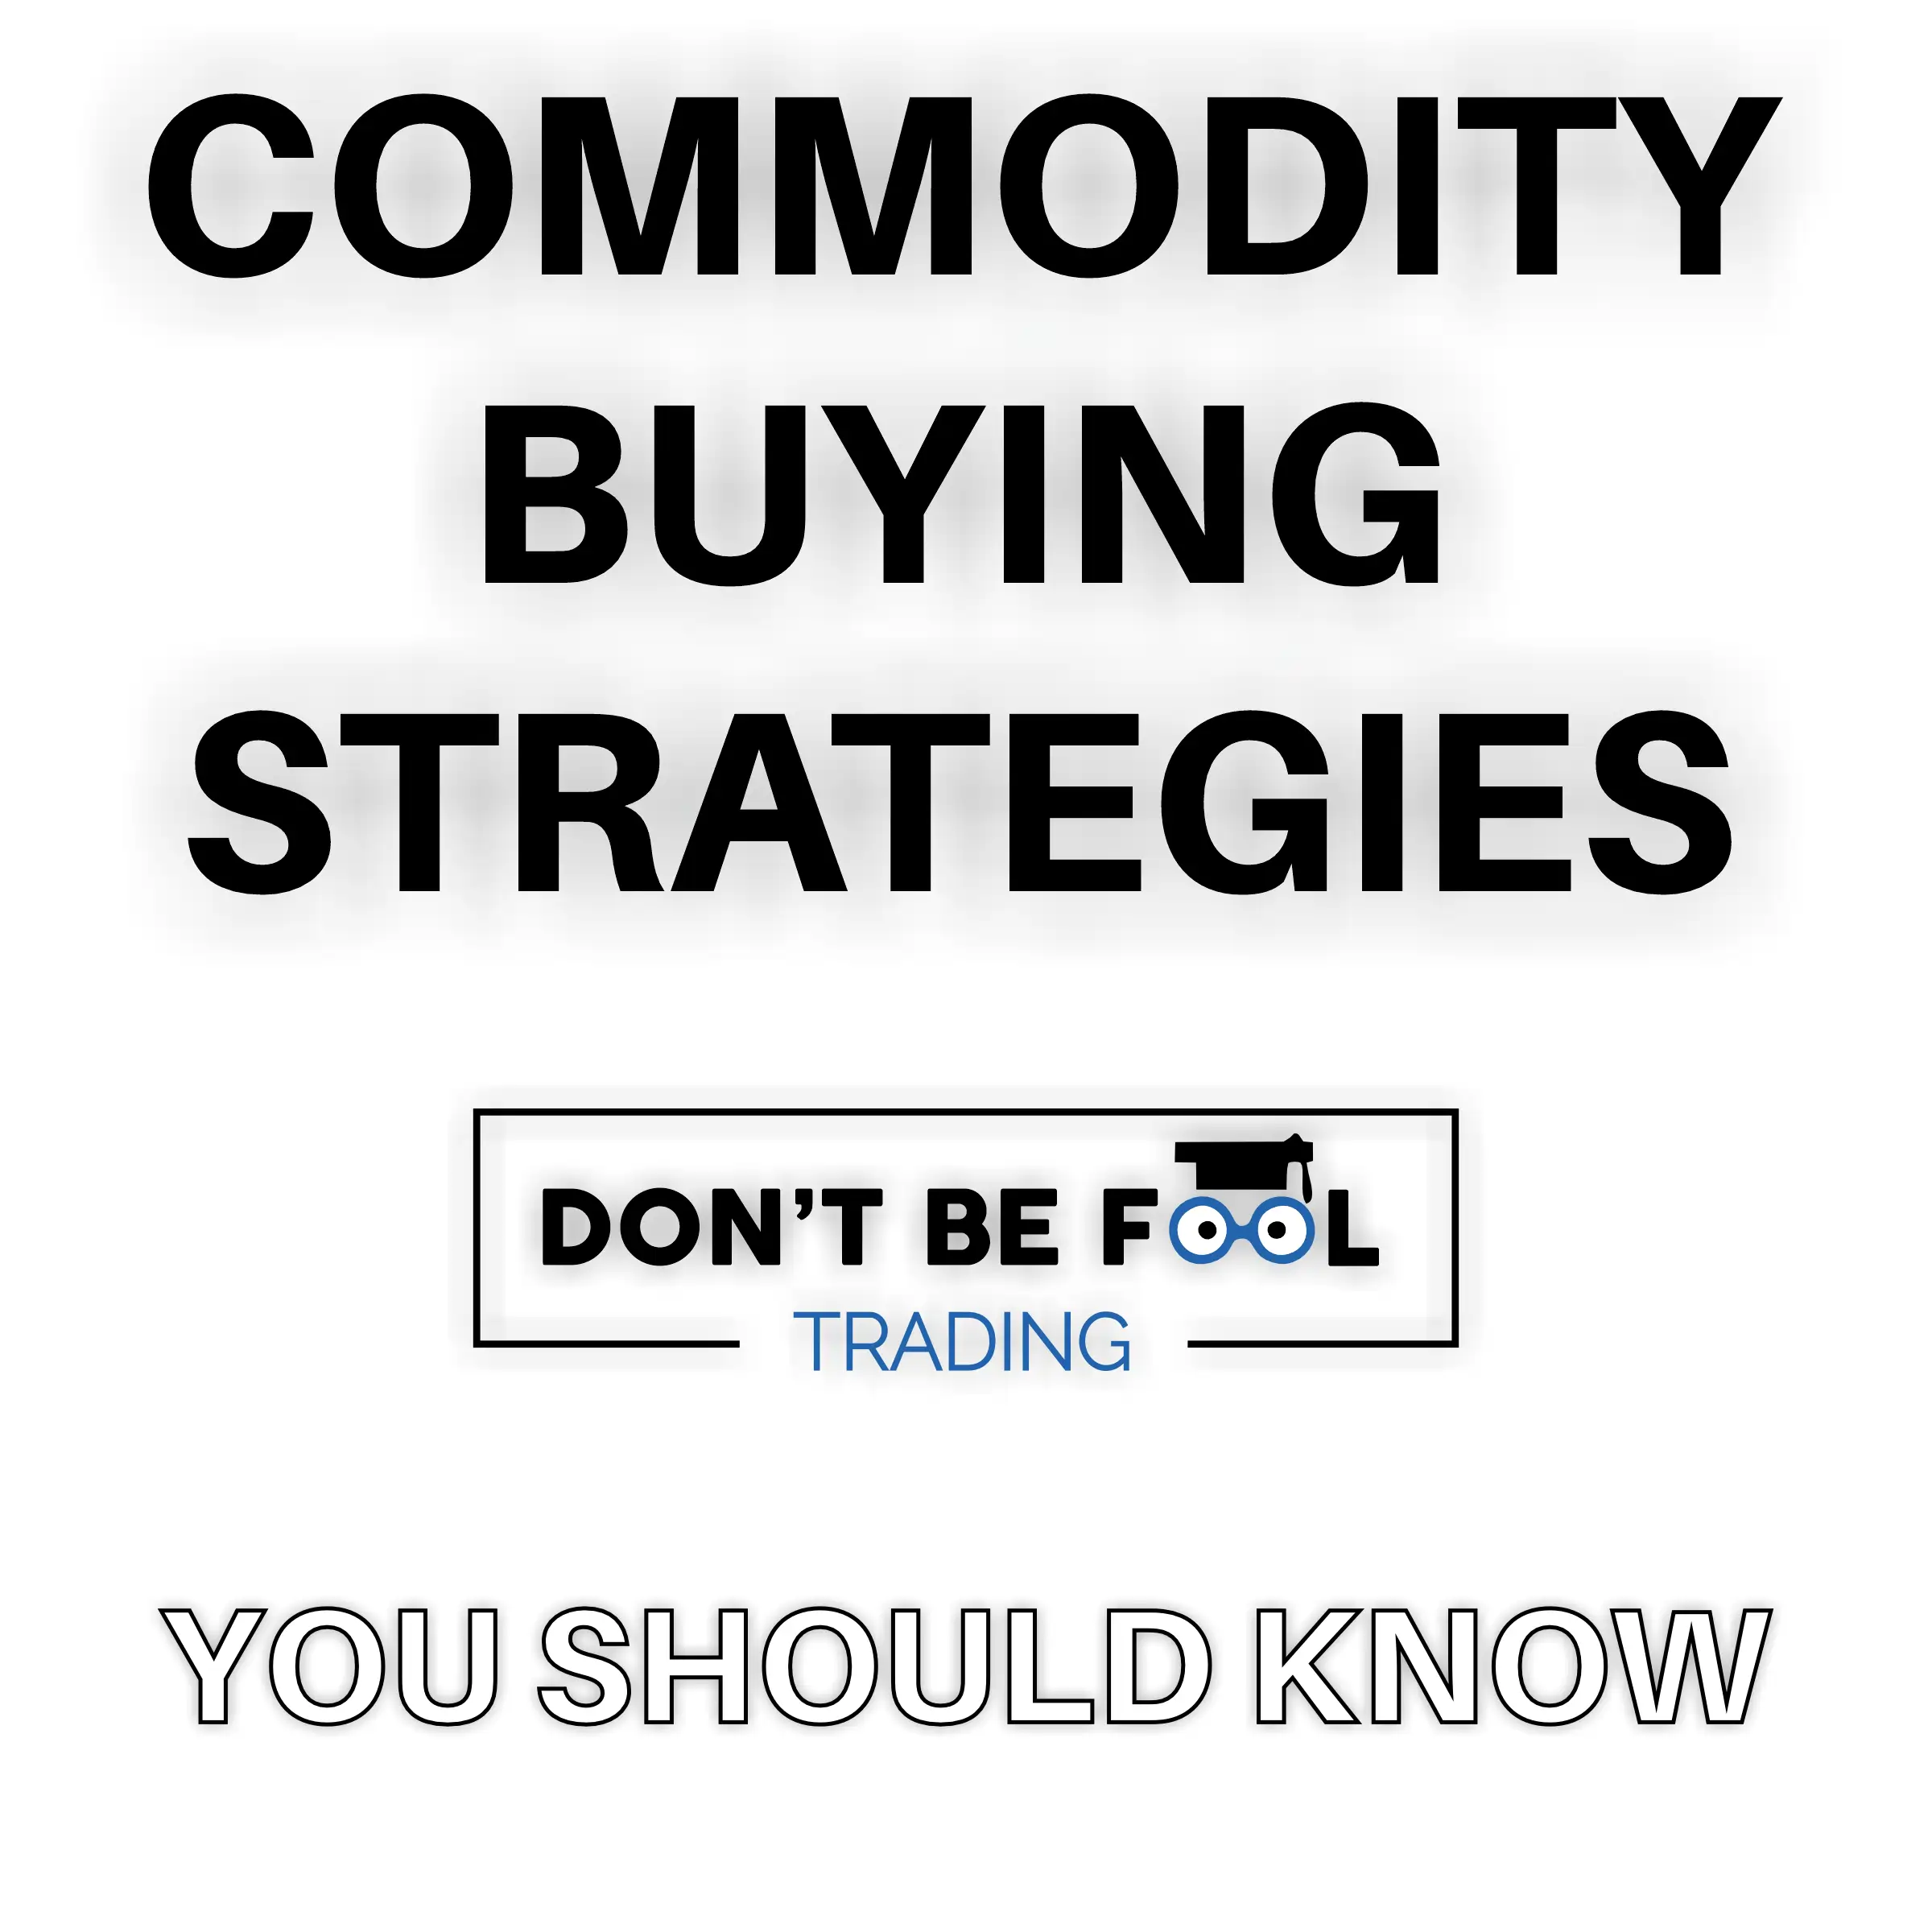 black text on white background saying Commodity Buying Strategies you should know and in center the dontbefooltrading logo